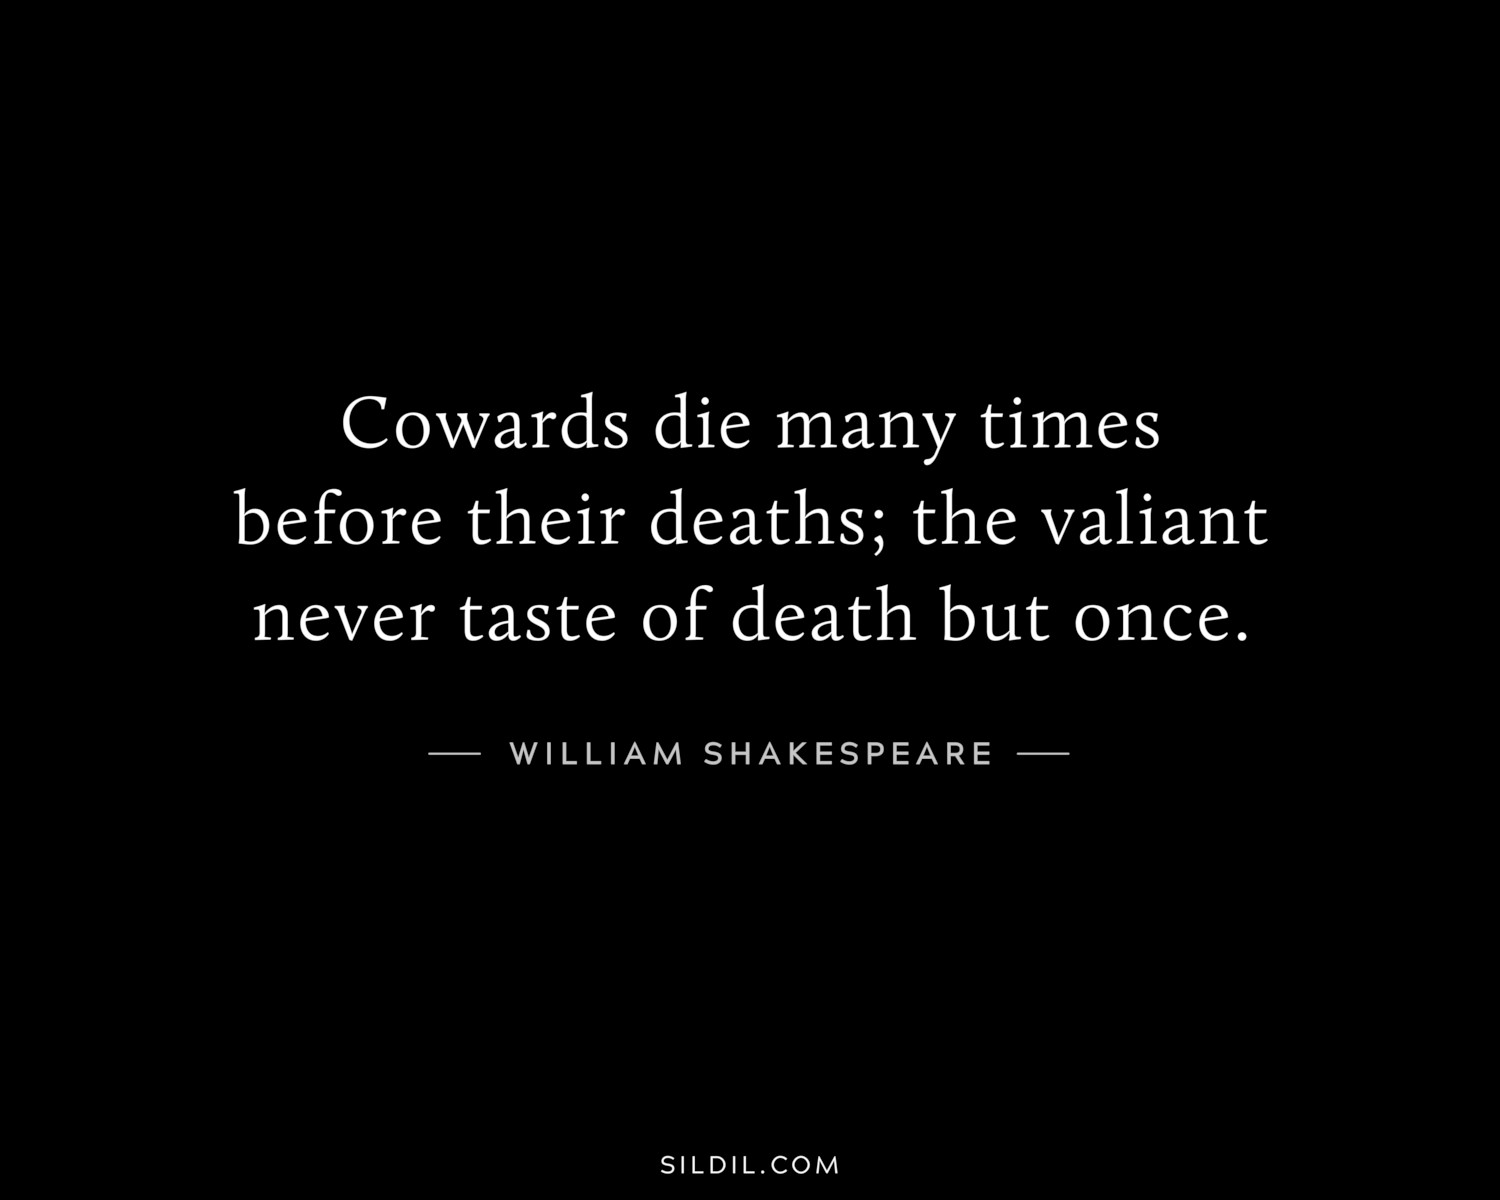 Cowards die many times before their deaths; the valiant never taste of death but once.